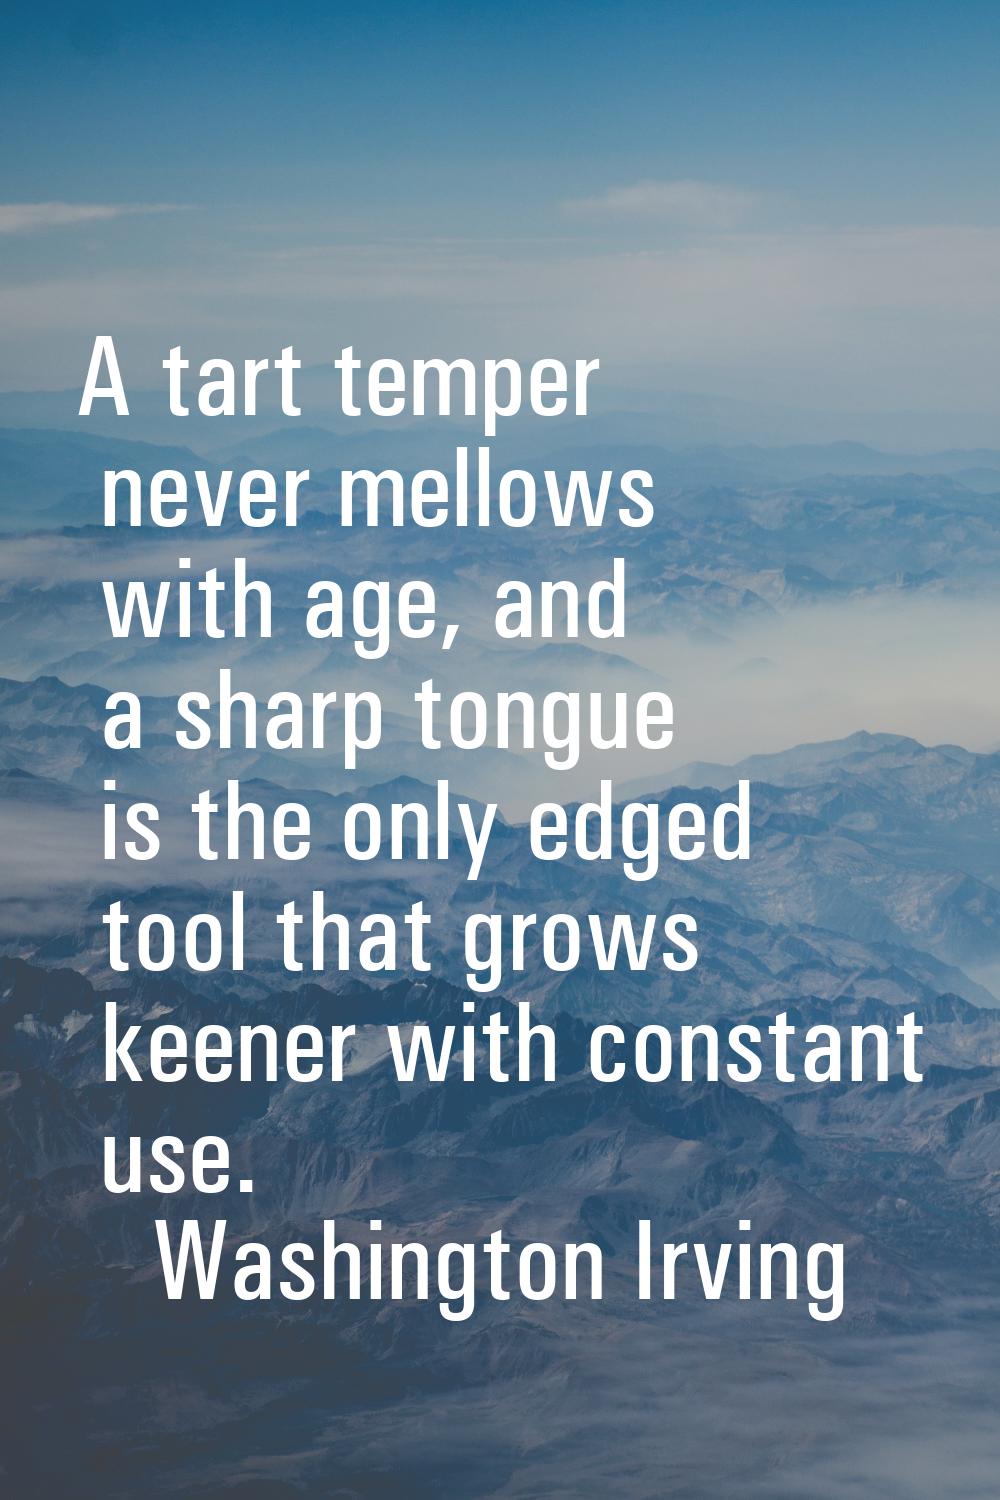 A tart temper never mellows with age, and a sharp tongue is the only edged tool that grows keener w